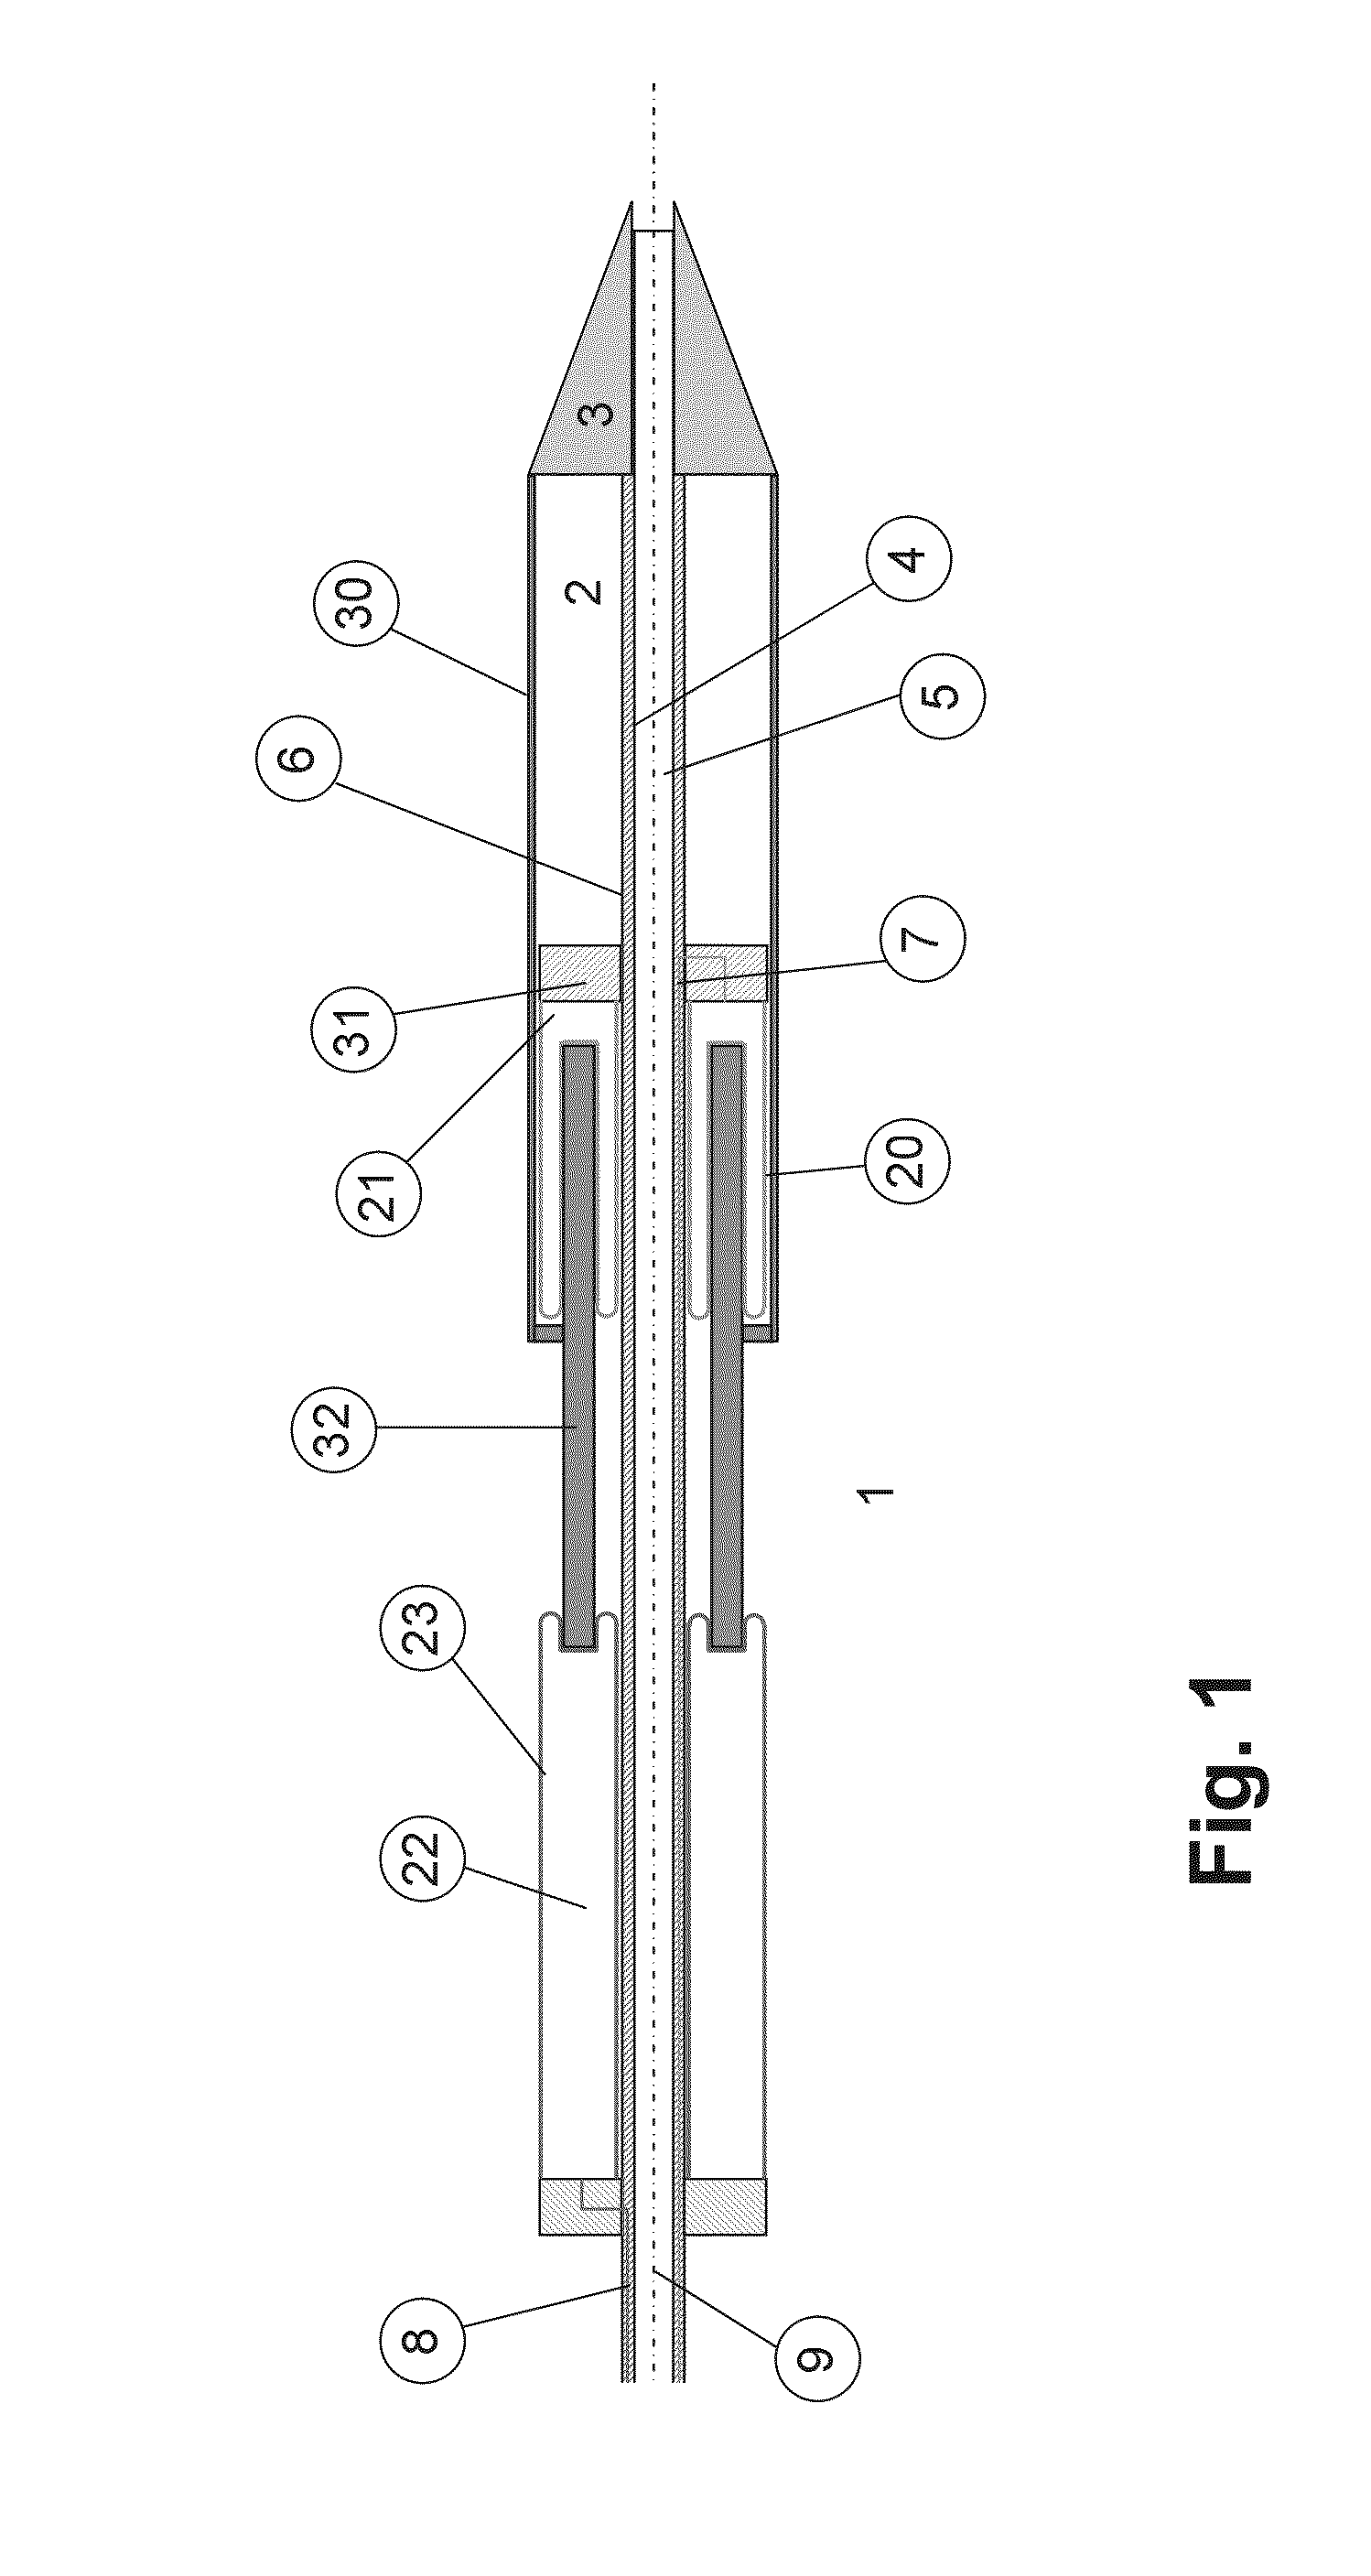 Catheter system with movable sleeve